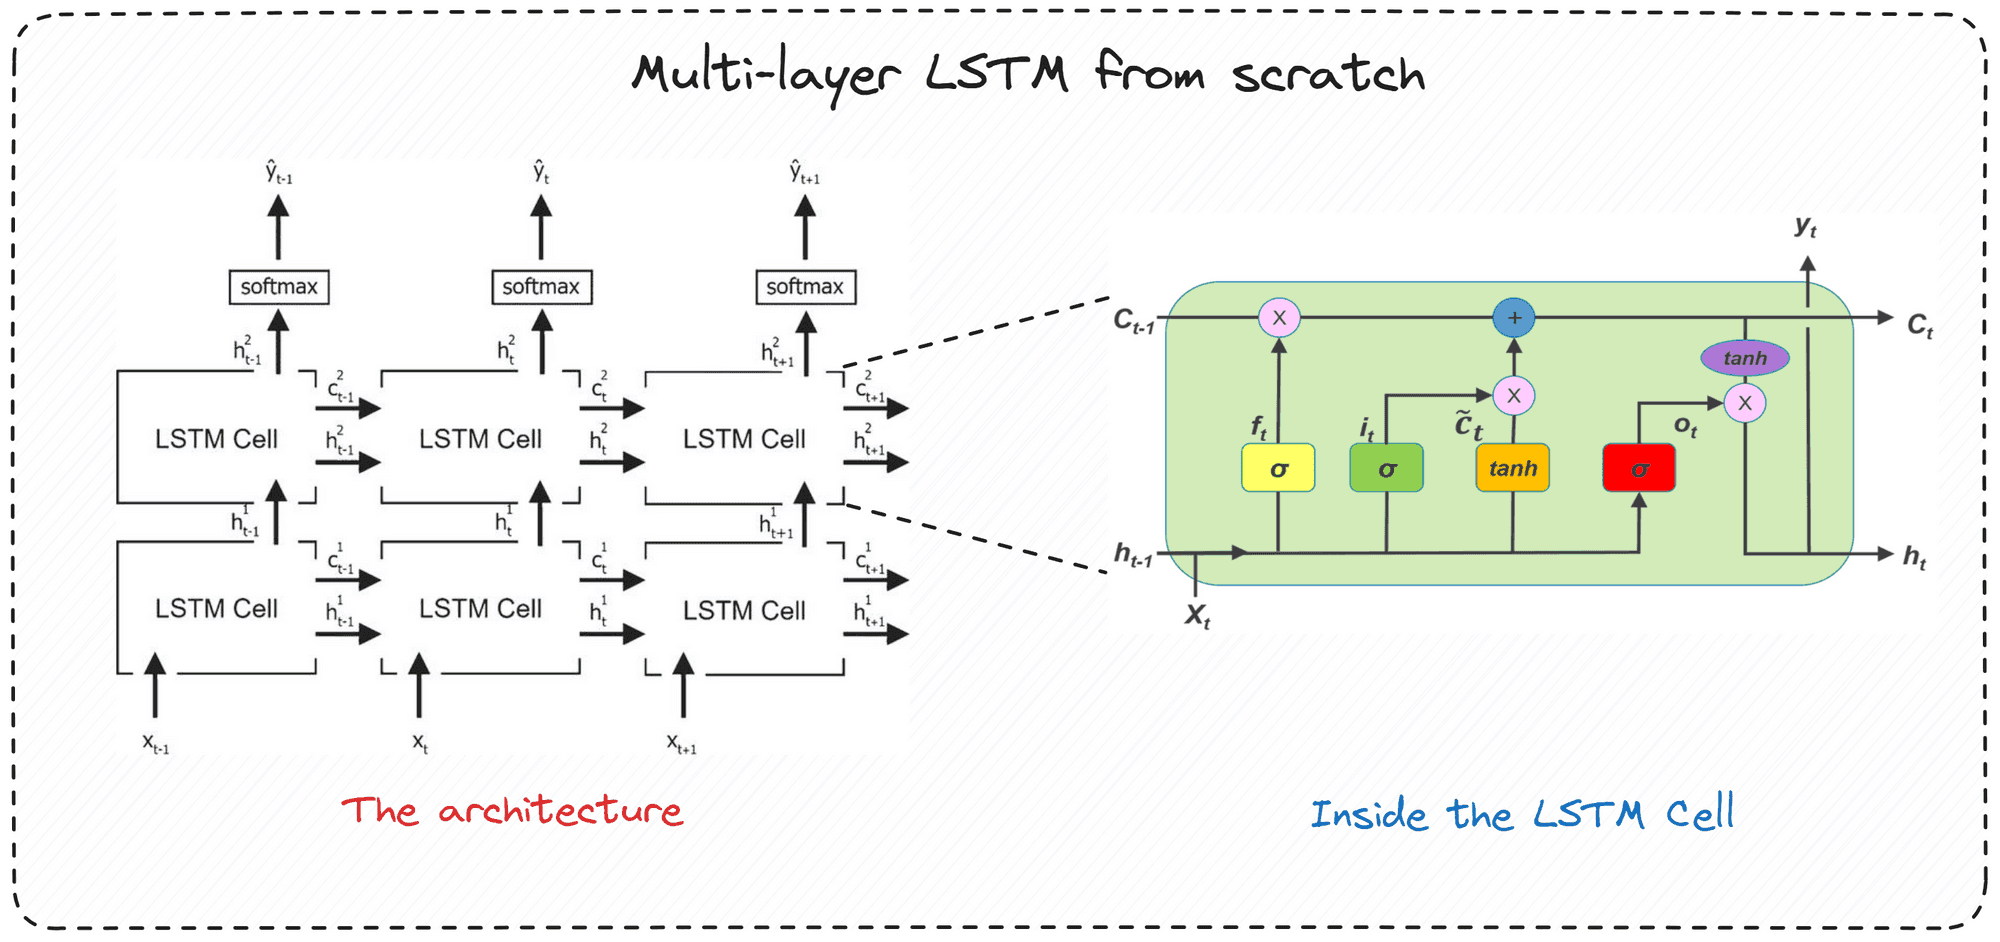 Building LSTMs from scratch